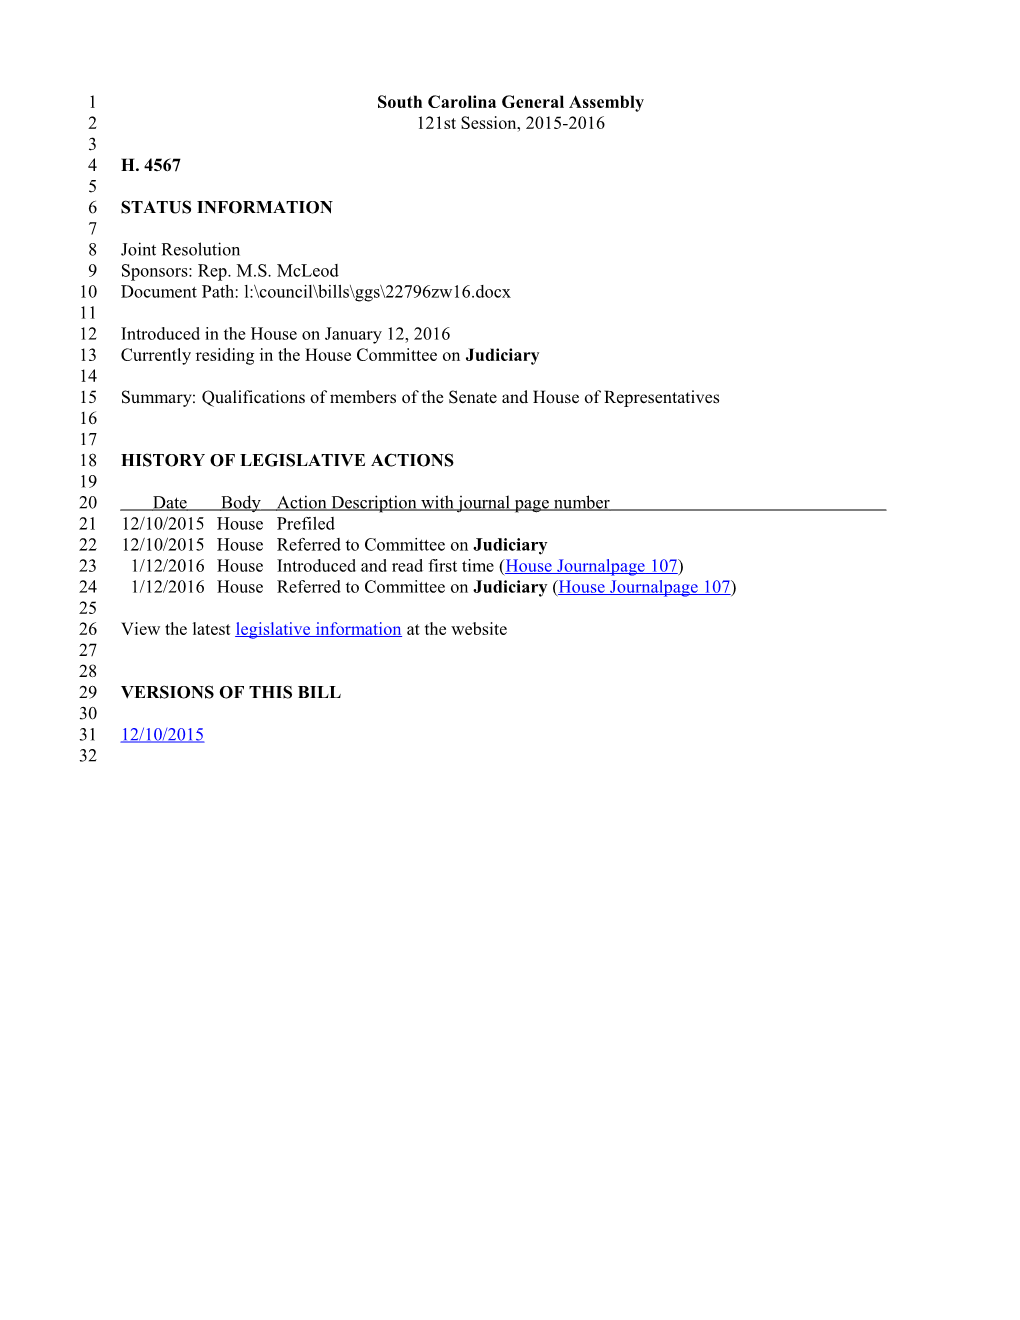 2015-2016 Bill 4567: Qualifications of Members of the Senate and House of Representatives